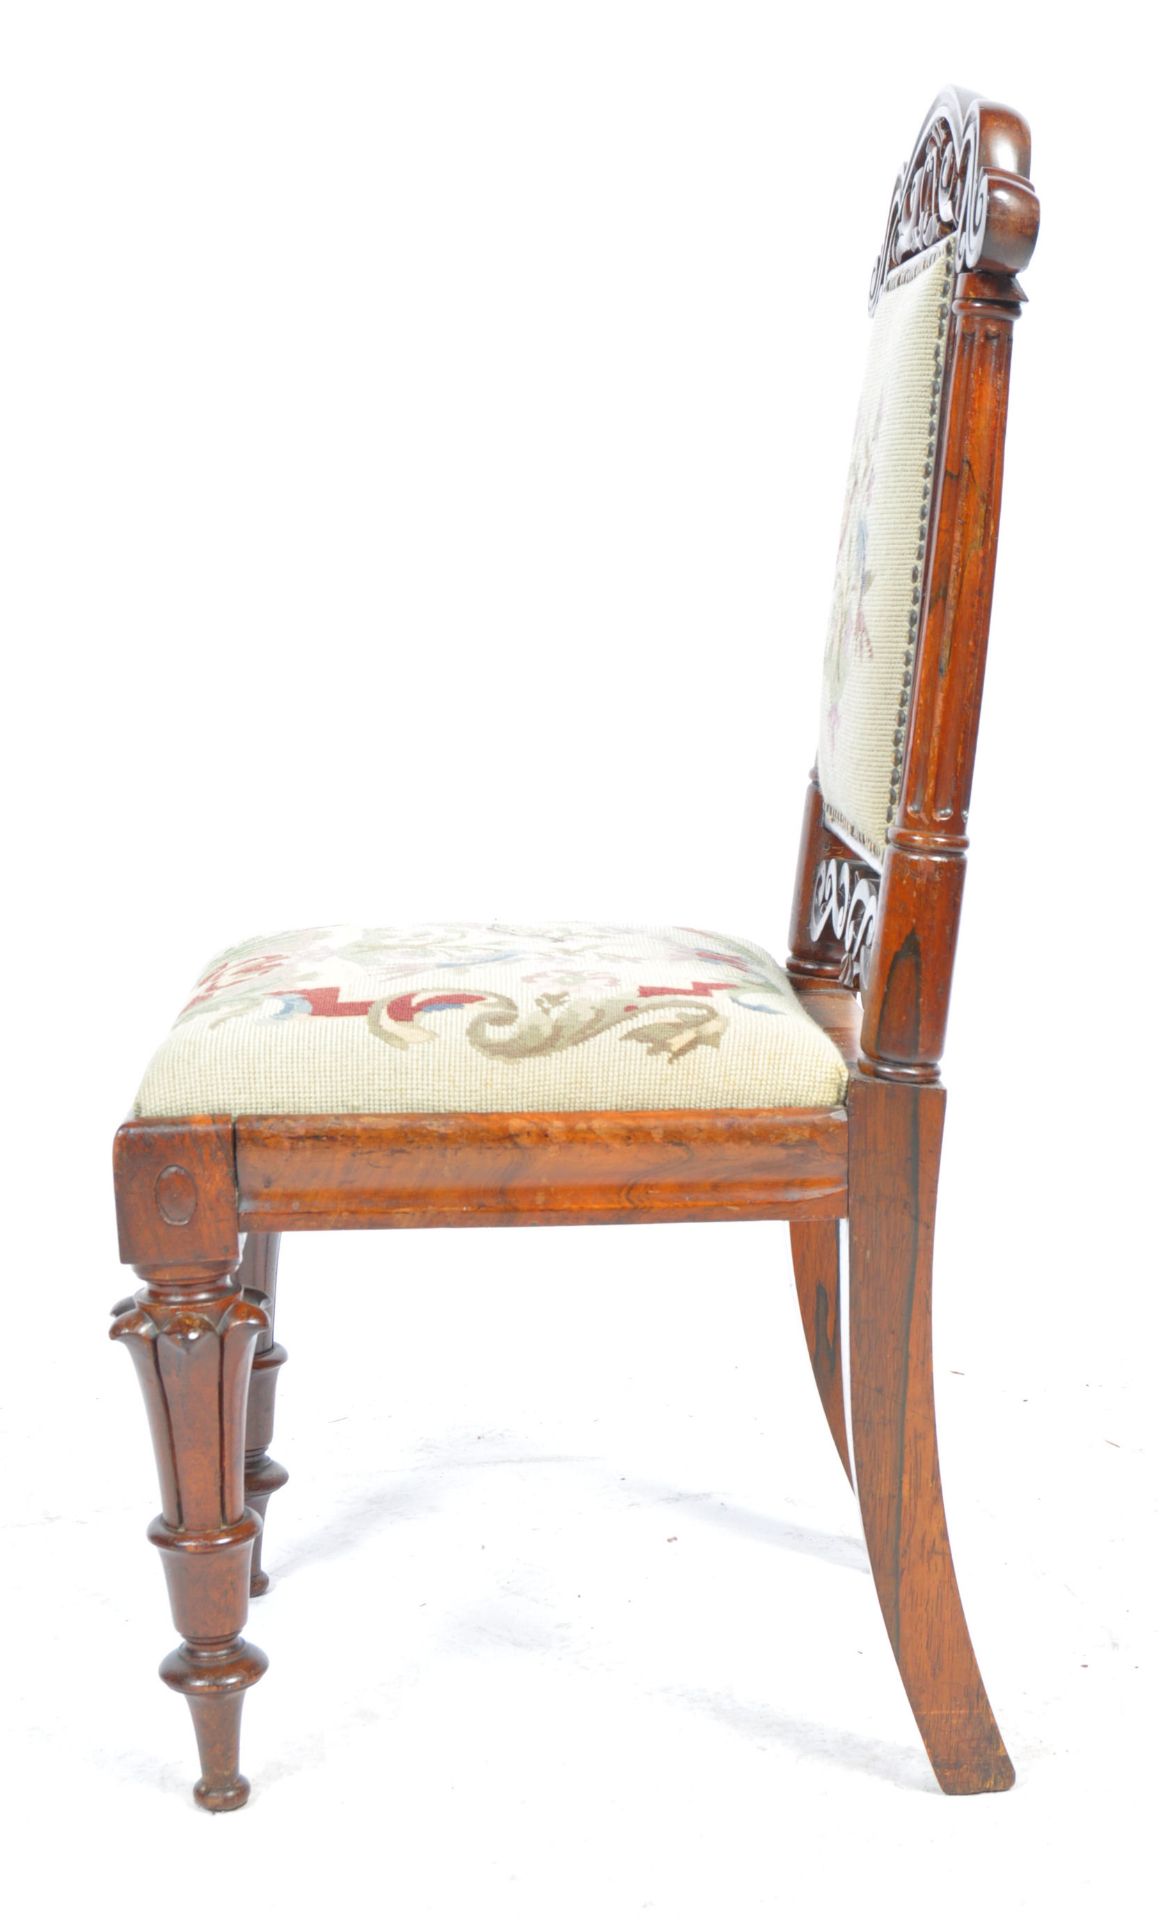 19TH CENTURY VICTORIAN ENGLISH ANTIQUE ROSEWOOD BEDROOM CHAIR - Image 3 of 7